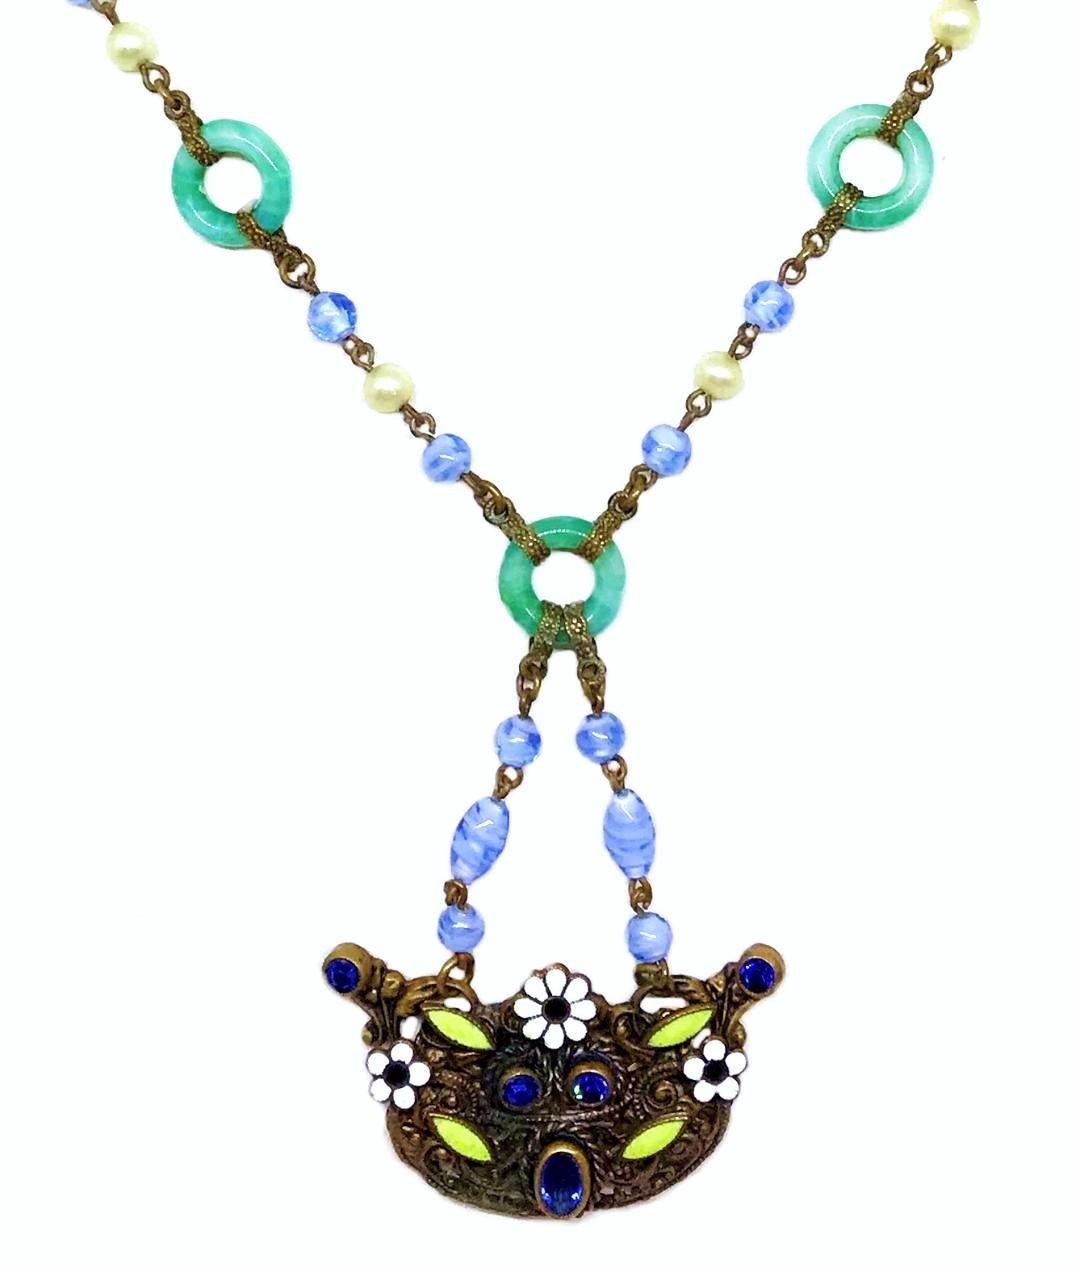 Circa 1920s Czech blue and green glass bead necklace with green glass circles and fancy brass findings. The ornate brass pendant is bezel set with dark blue faceted glass stones and embellished with enameling.  The pendant, including the bead chain